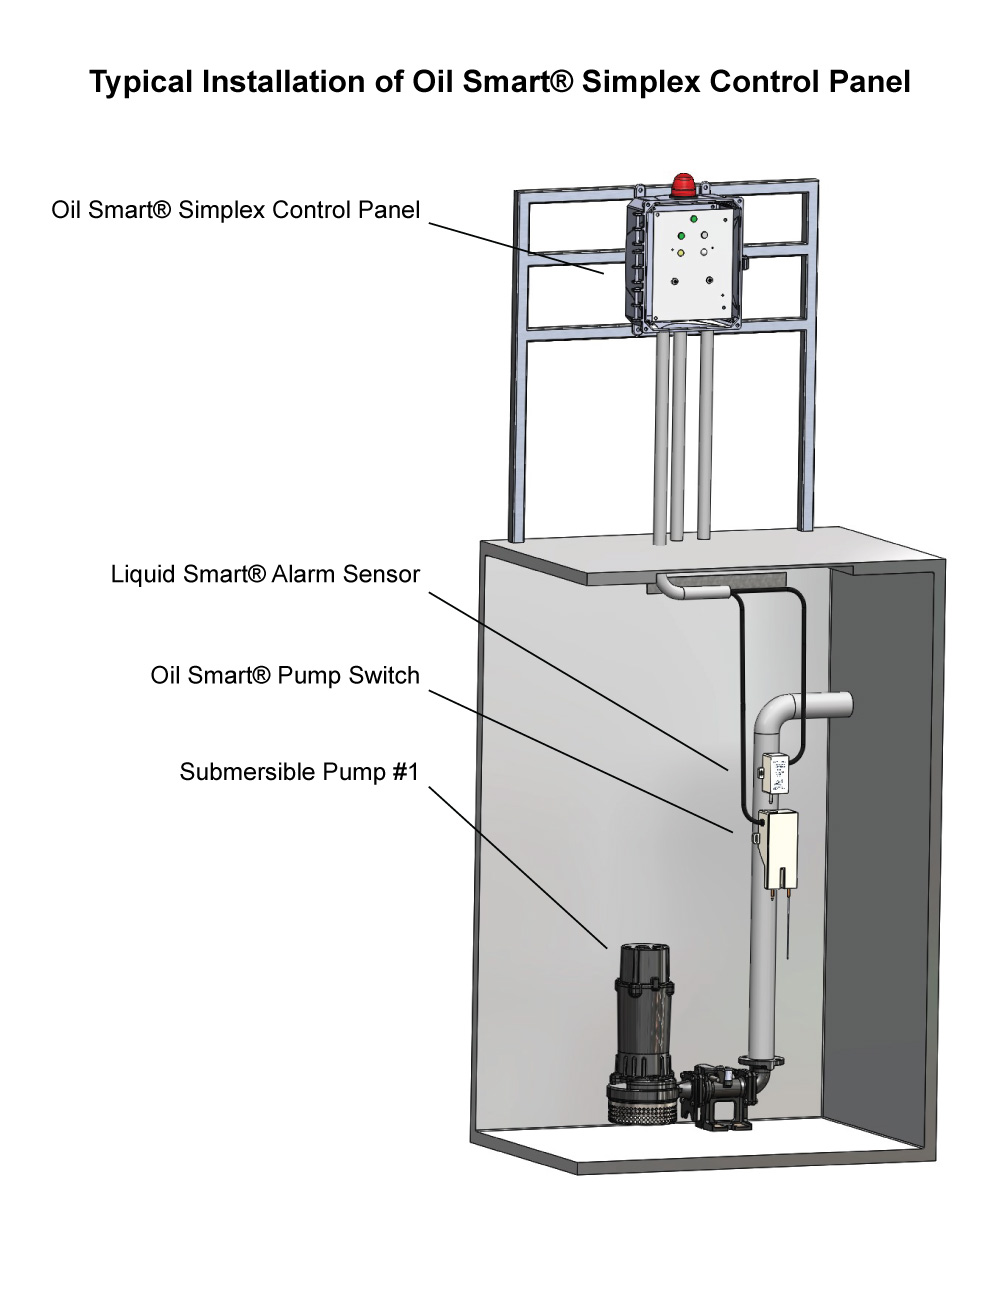 Typical Application: Single Phase Simplex OSSIM-TP-1